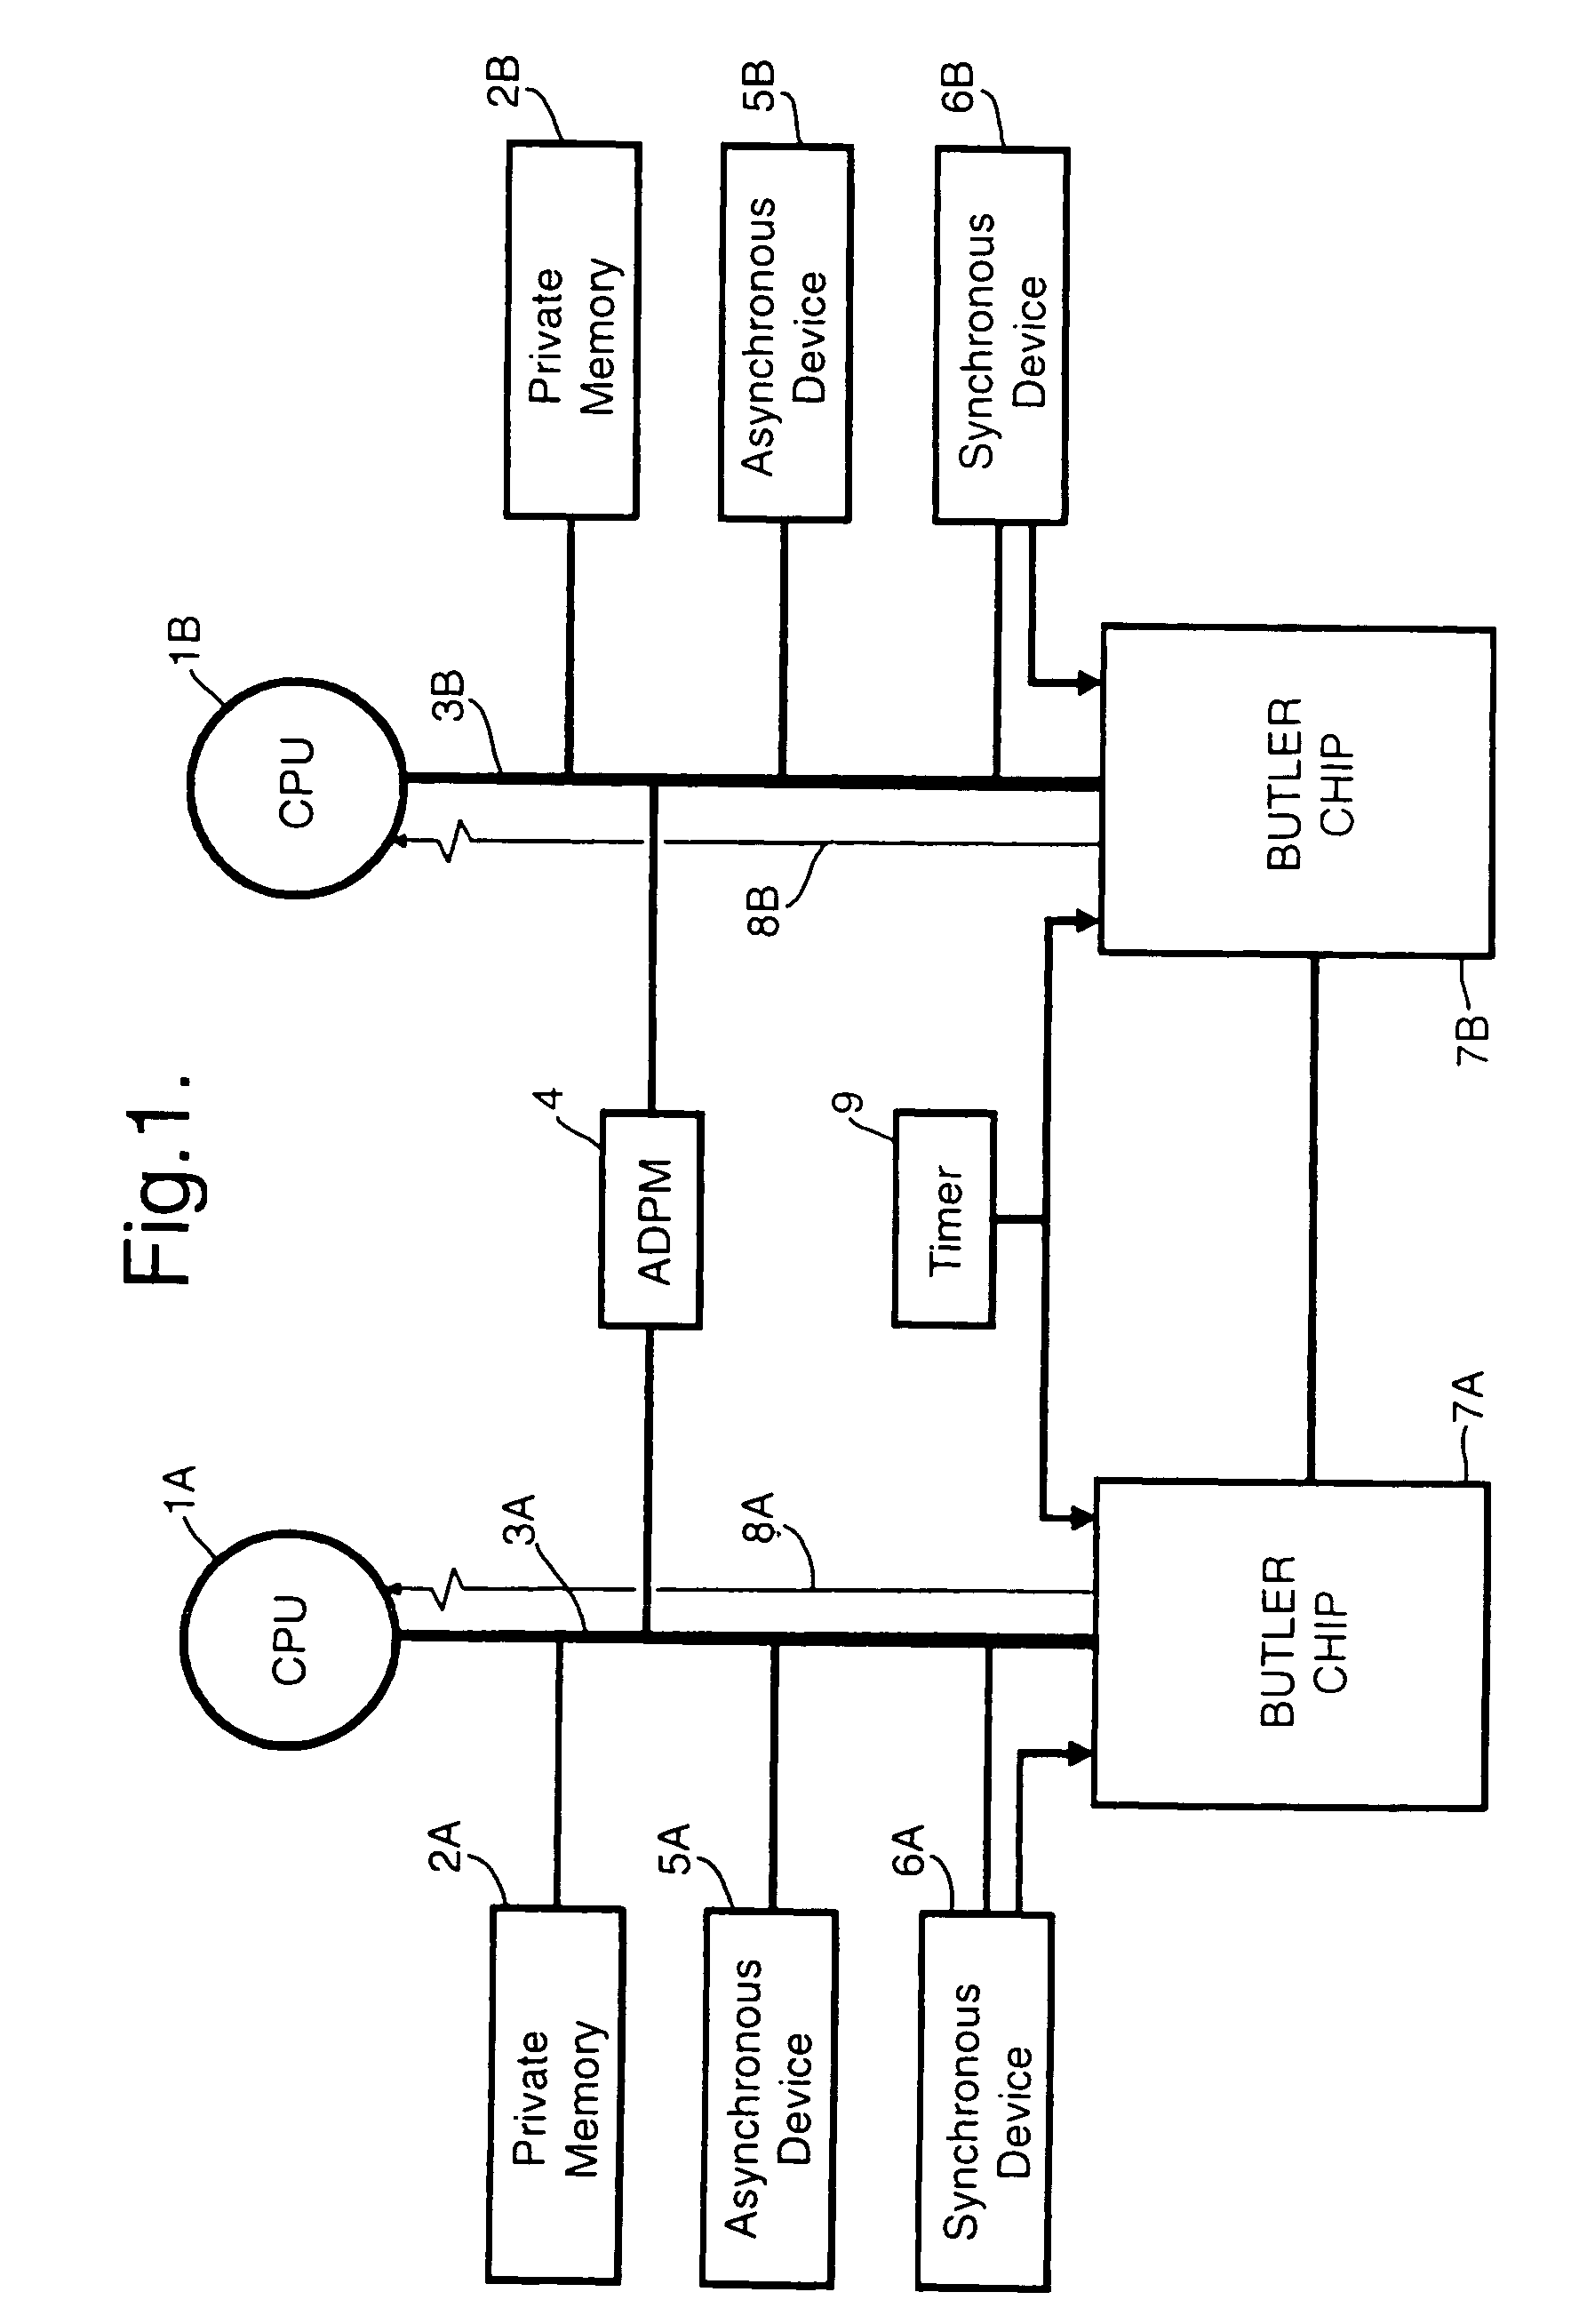 Integrated circuits for multi-tasking support in single or multiple processor networks